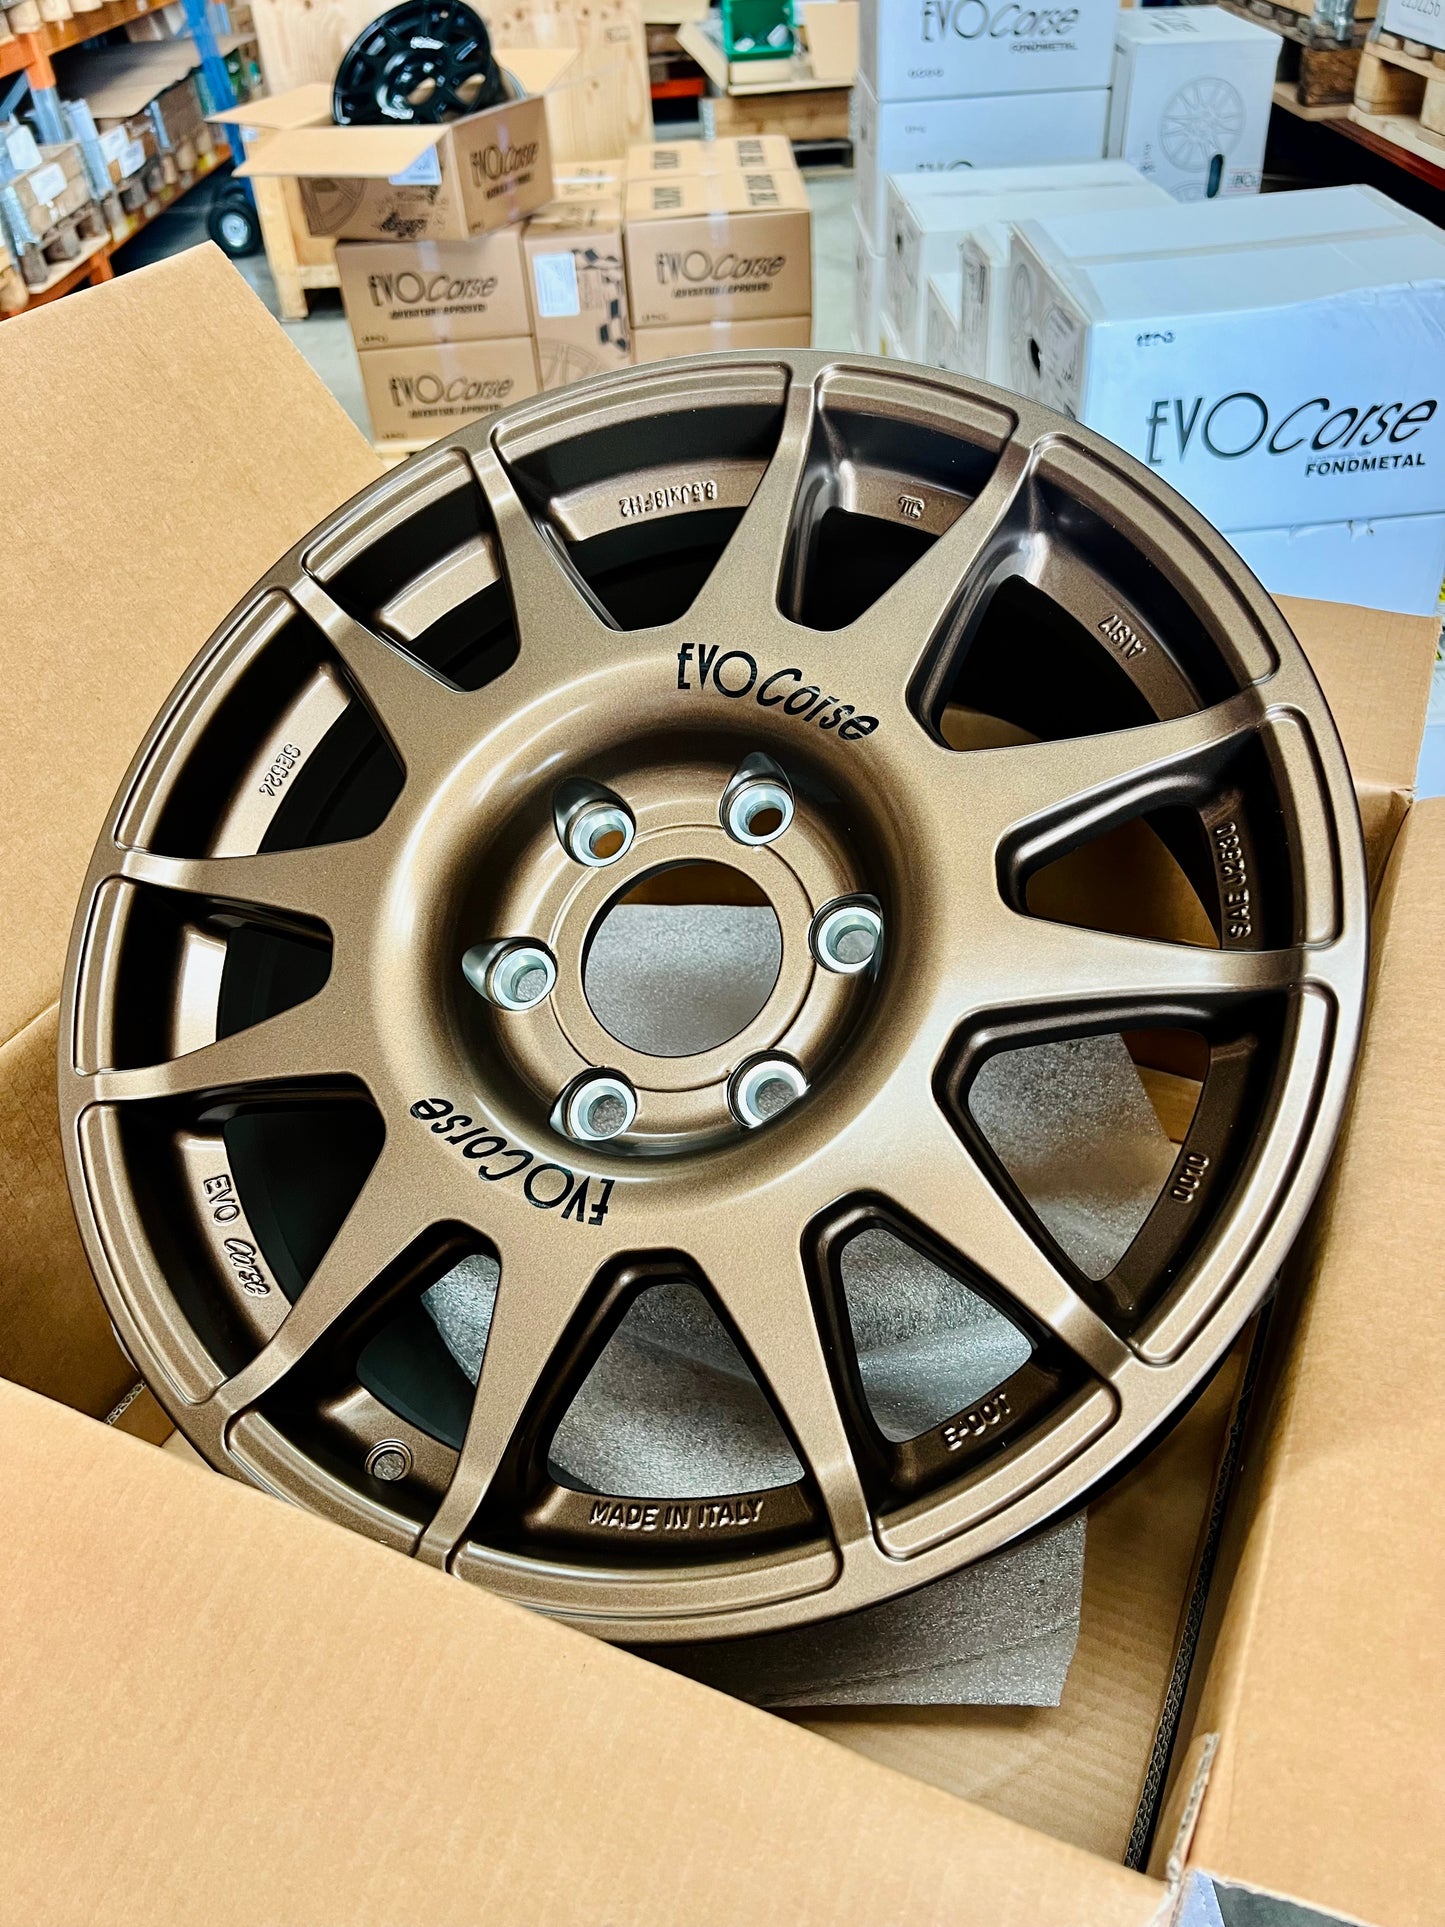 Ineos grenadier alloy wheel the offset that comes to the edge of the guard. Rally 18 x 8.5 with a positive 45 offset. Also, for land cruiser 300 series, with a 47 offset. Best wheel for all terrain tyres. Like BFGoodrich of Falken 275 65 r18. High strength for GVM upgrade. Evo Corse, made in Italy. Pictured here in box from Overlanders, Matt bronze colour.